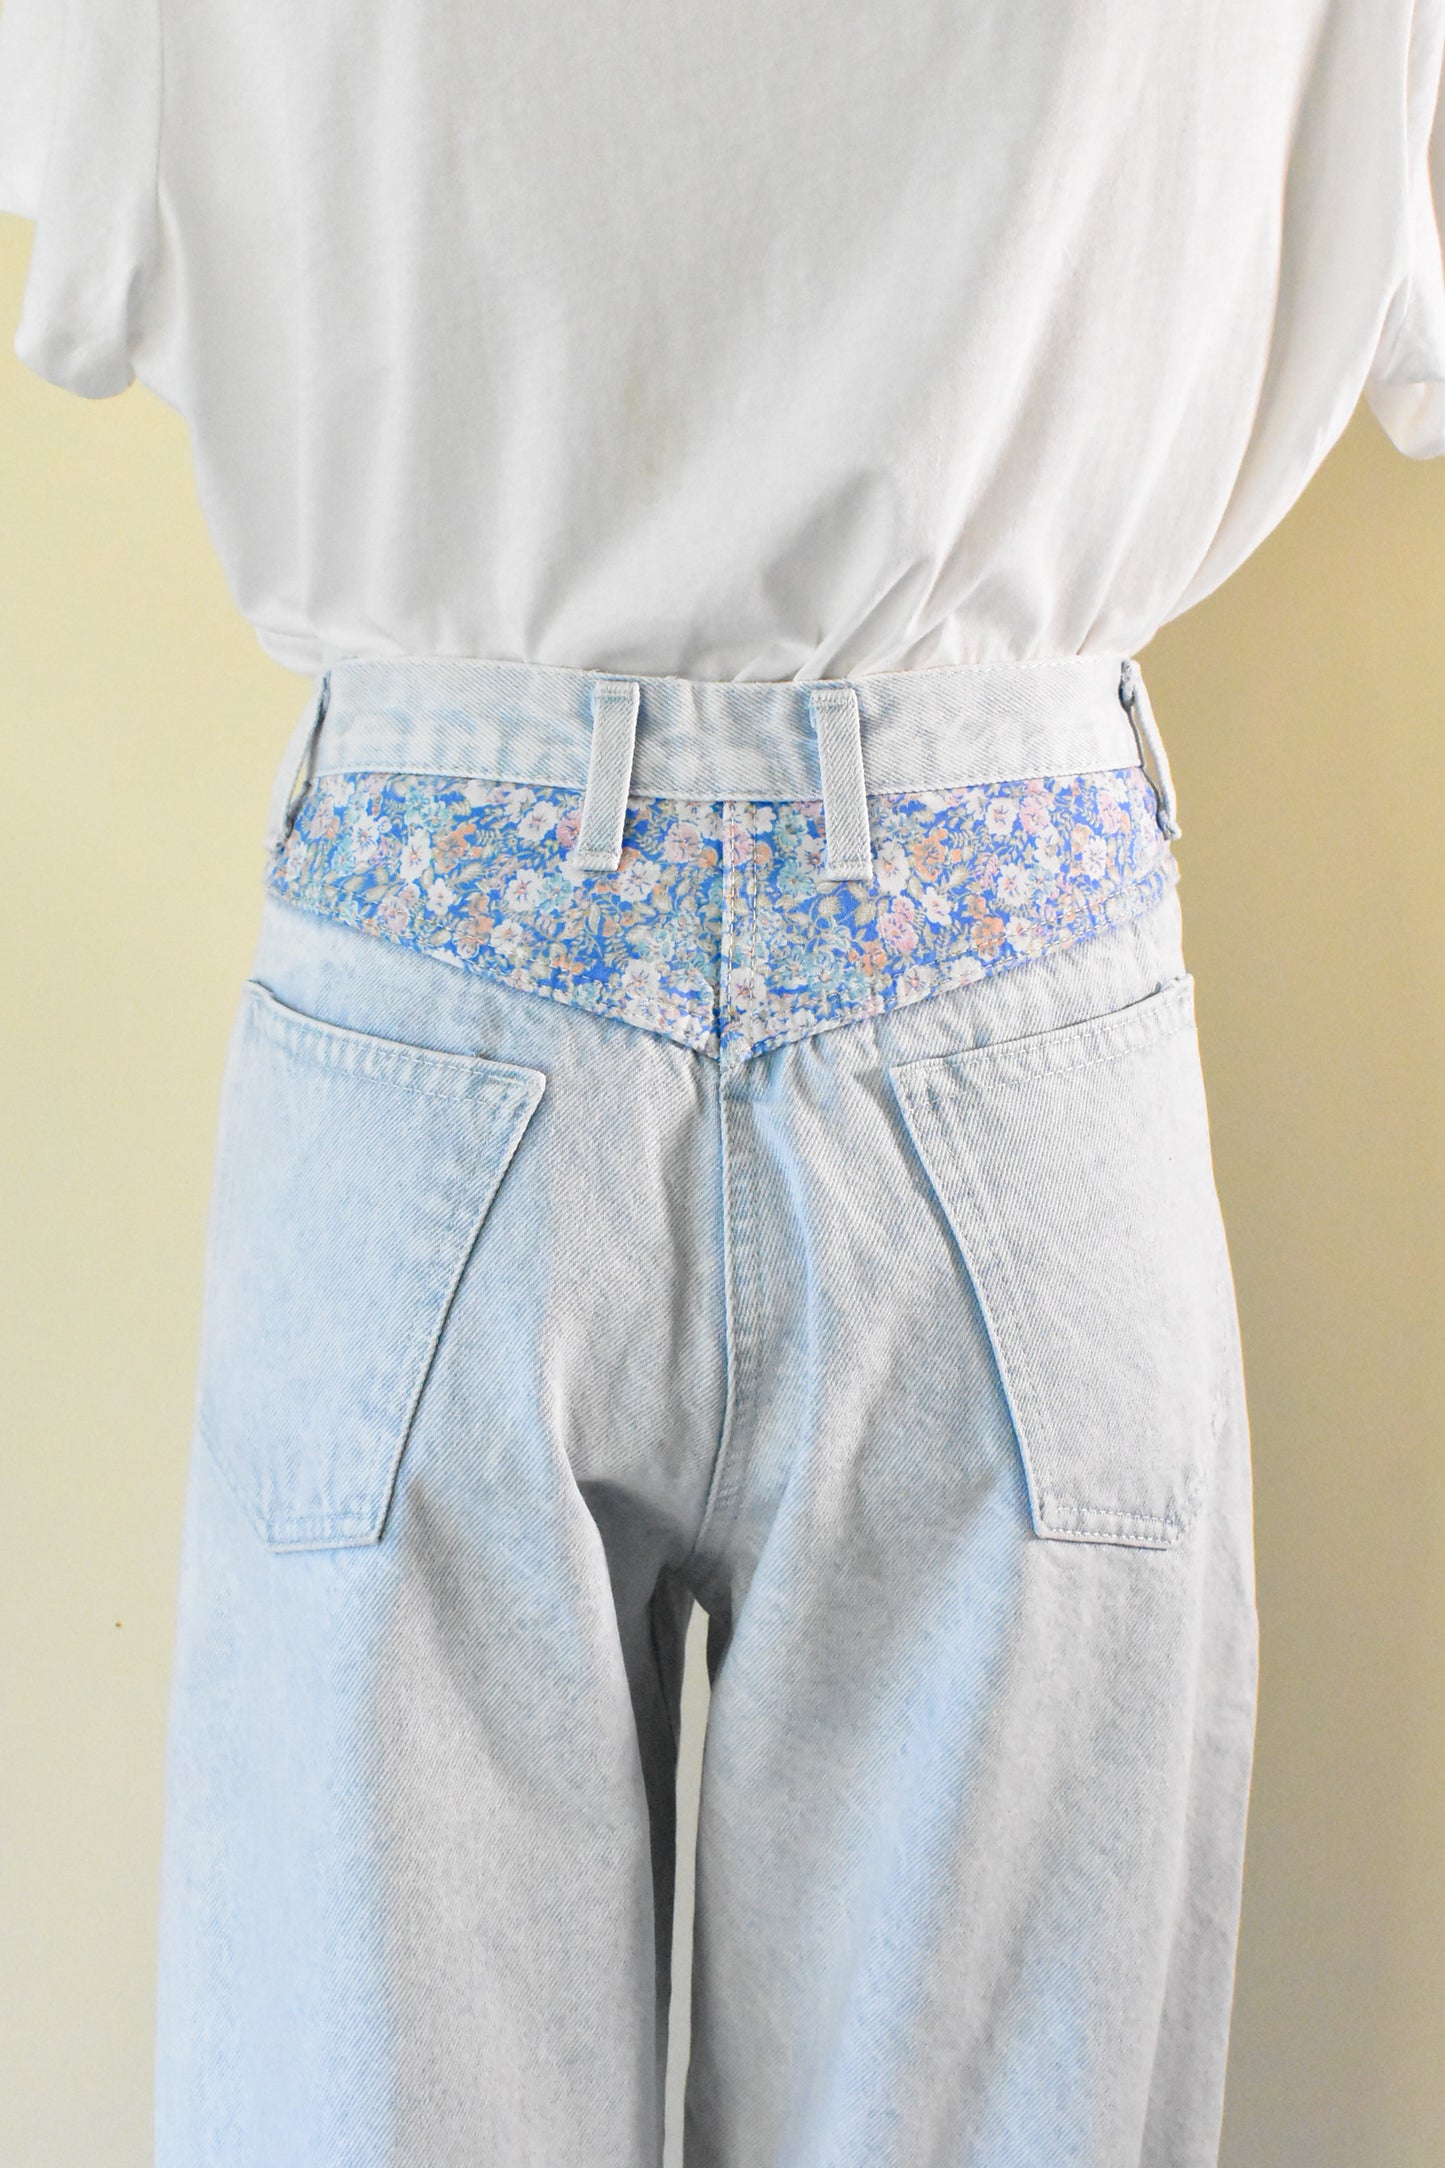 Dee's high waisted retro floral panel mom jeans, 14